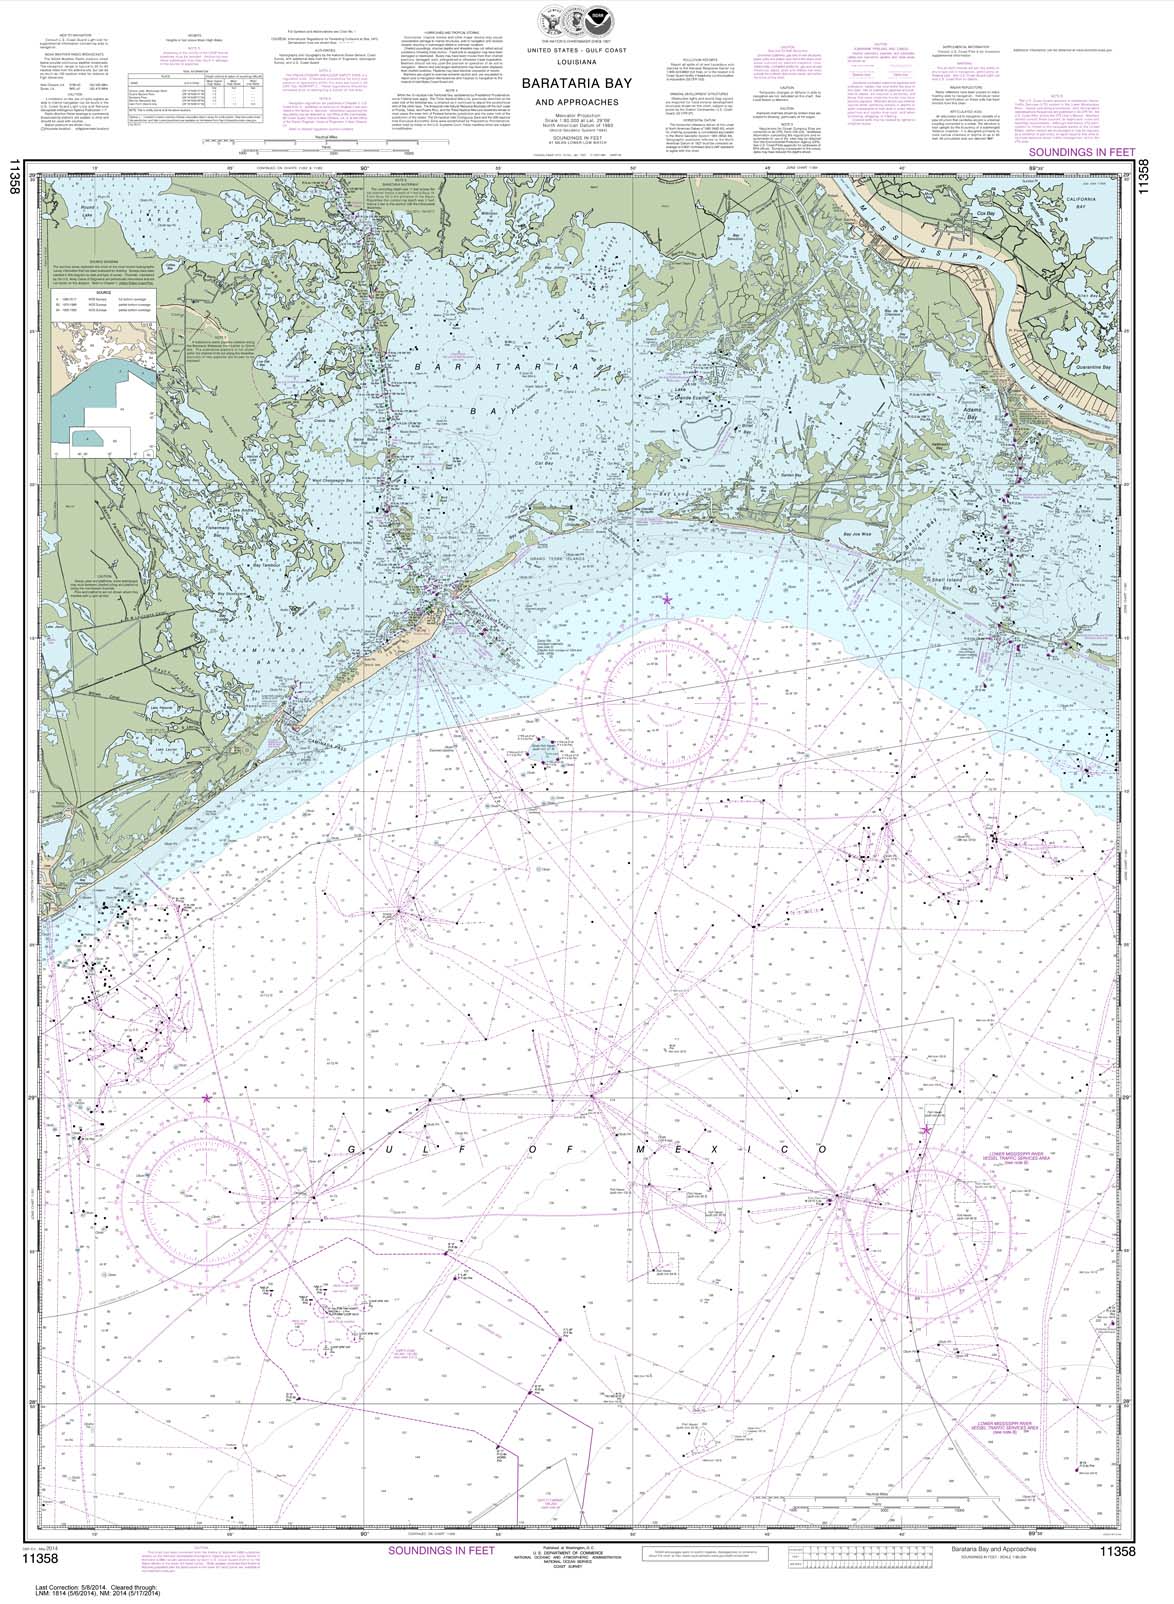 NOAA Chart 11358: Barataria Bay and approaches